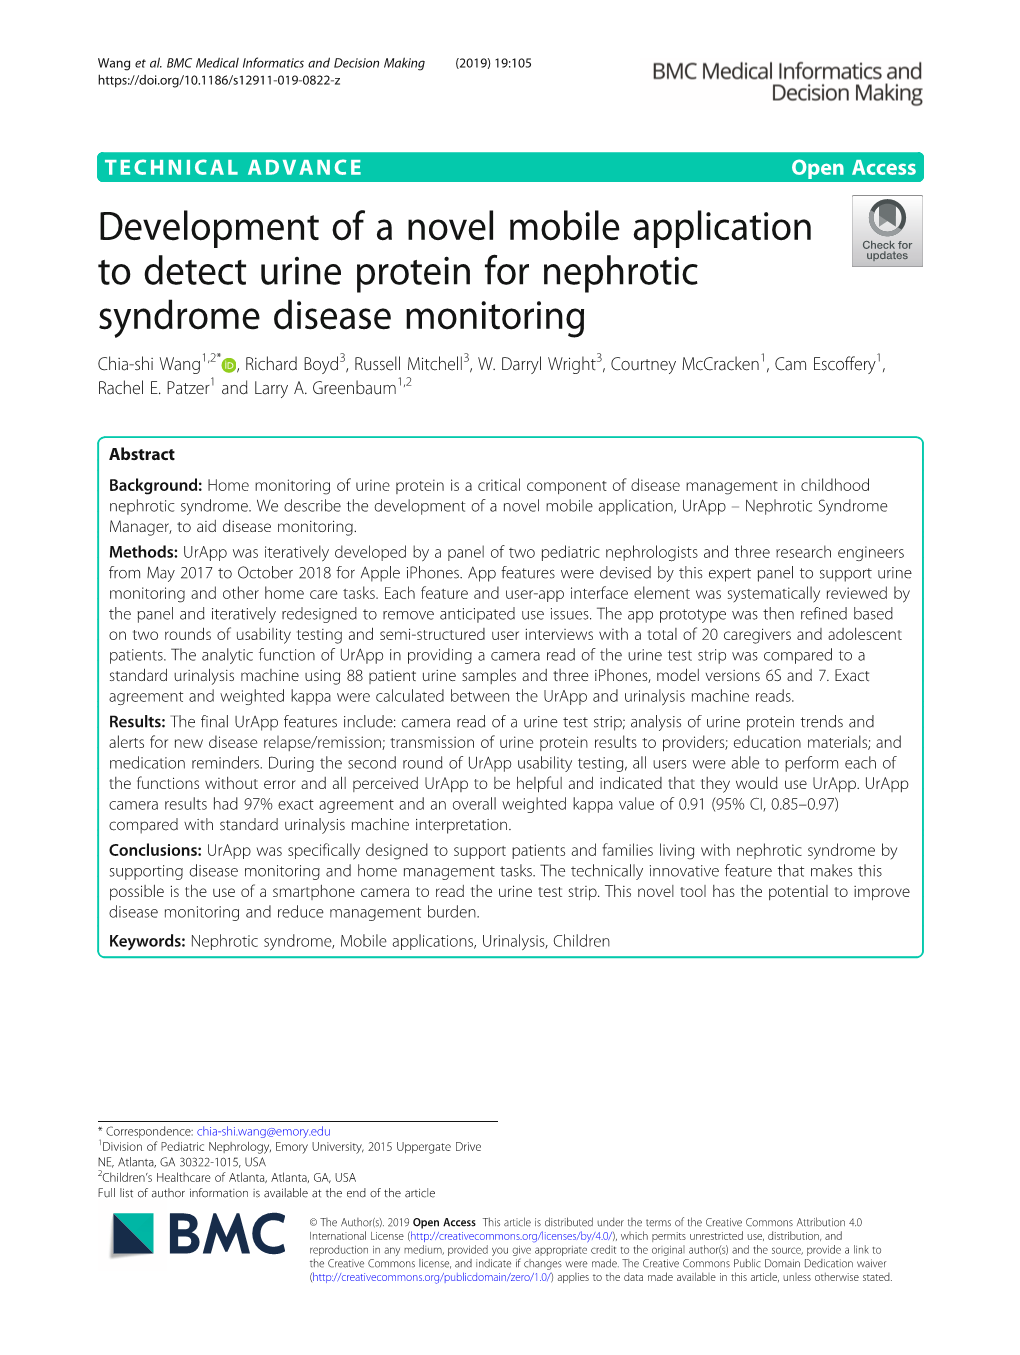 Development of a Novel Mobile Application to Detect Urine Protein for Nephrotic Syndrome Disease Monitoring Chia-Shi Wang1,2* , Richard Boyd3, Russell Mitchell3, W